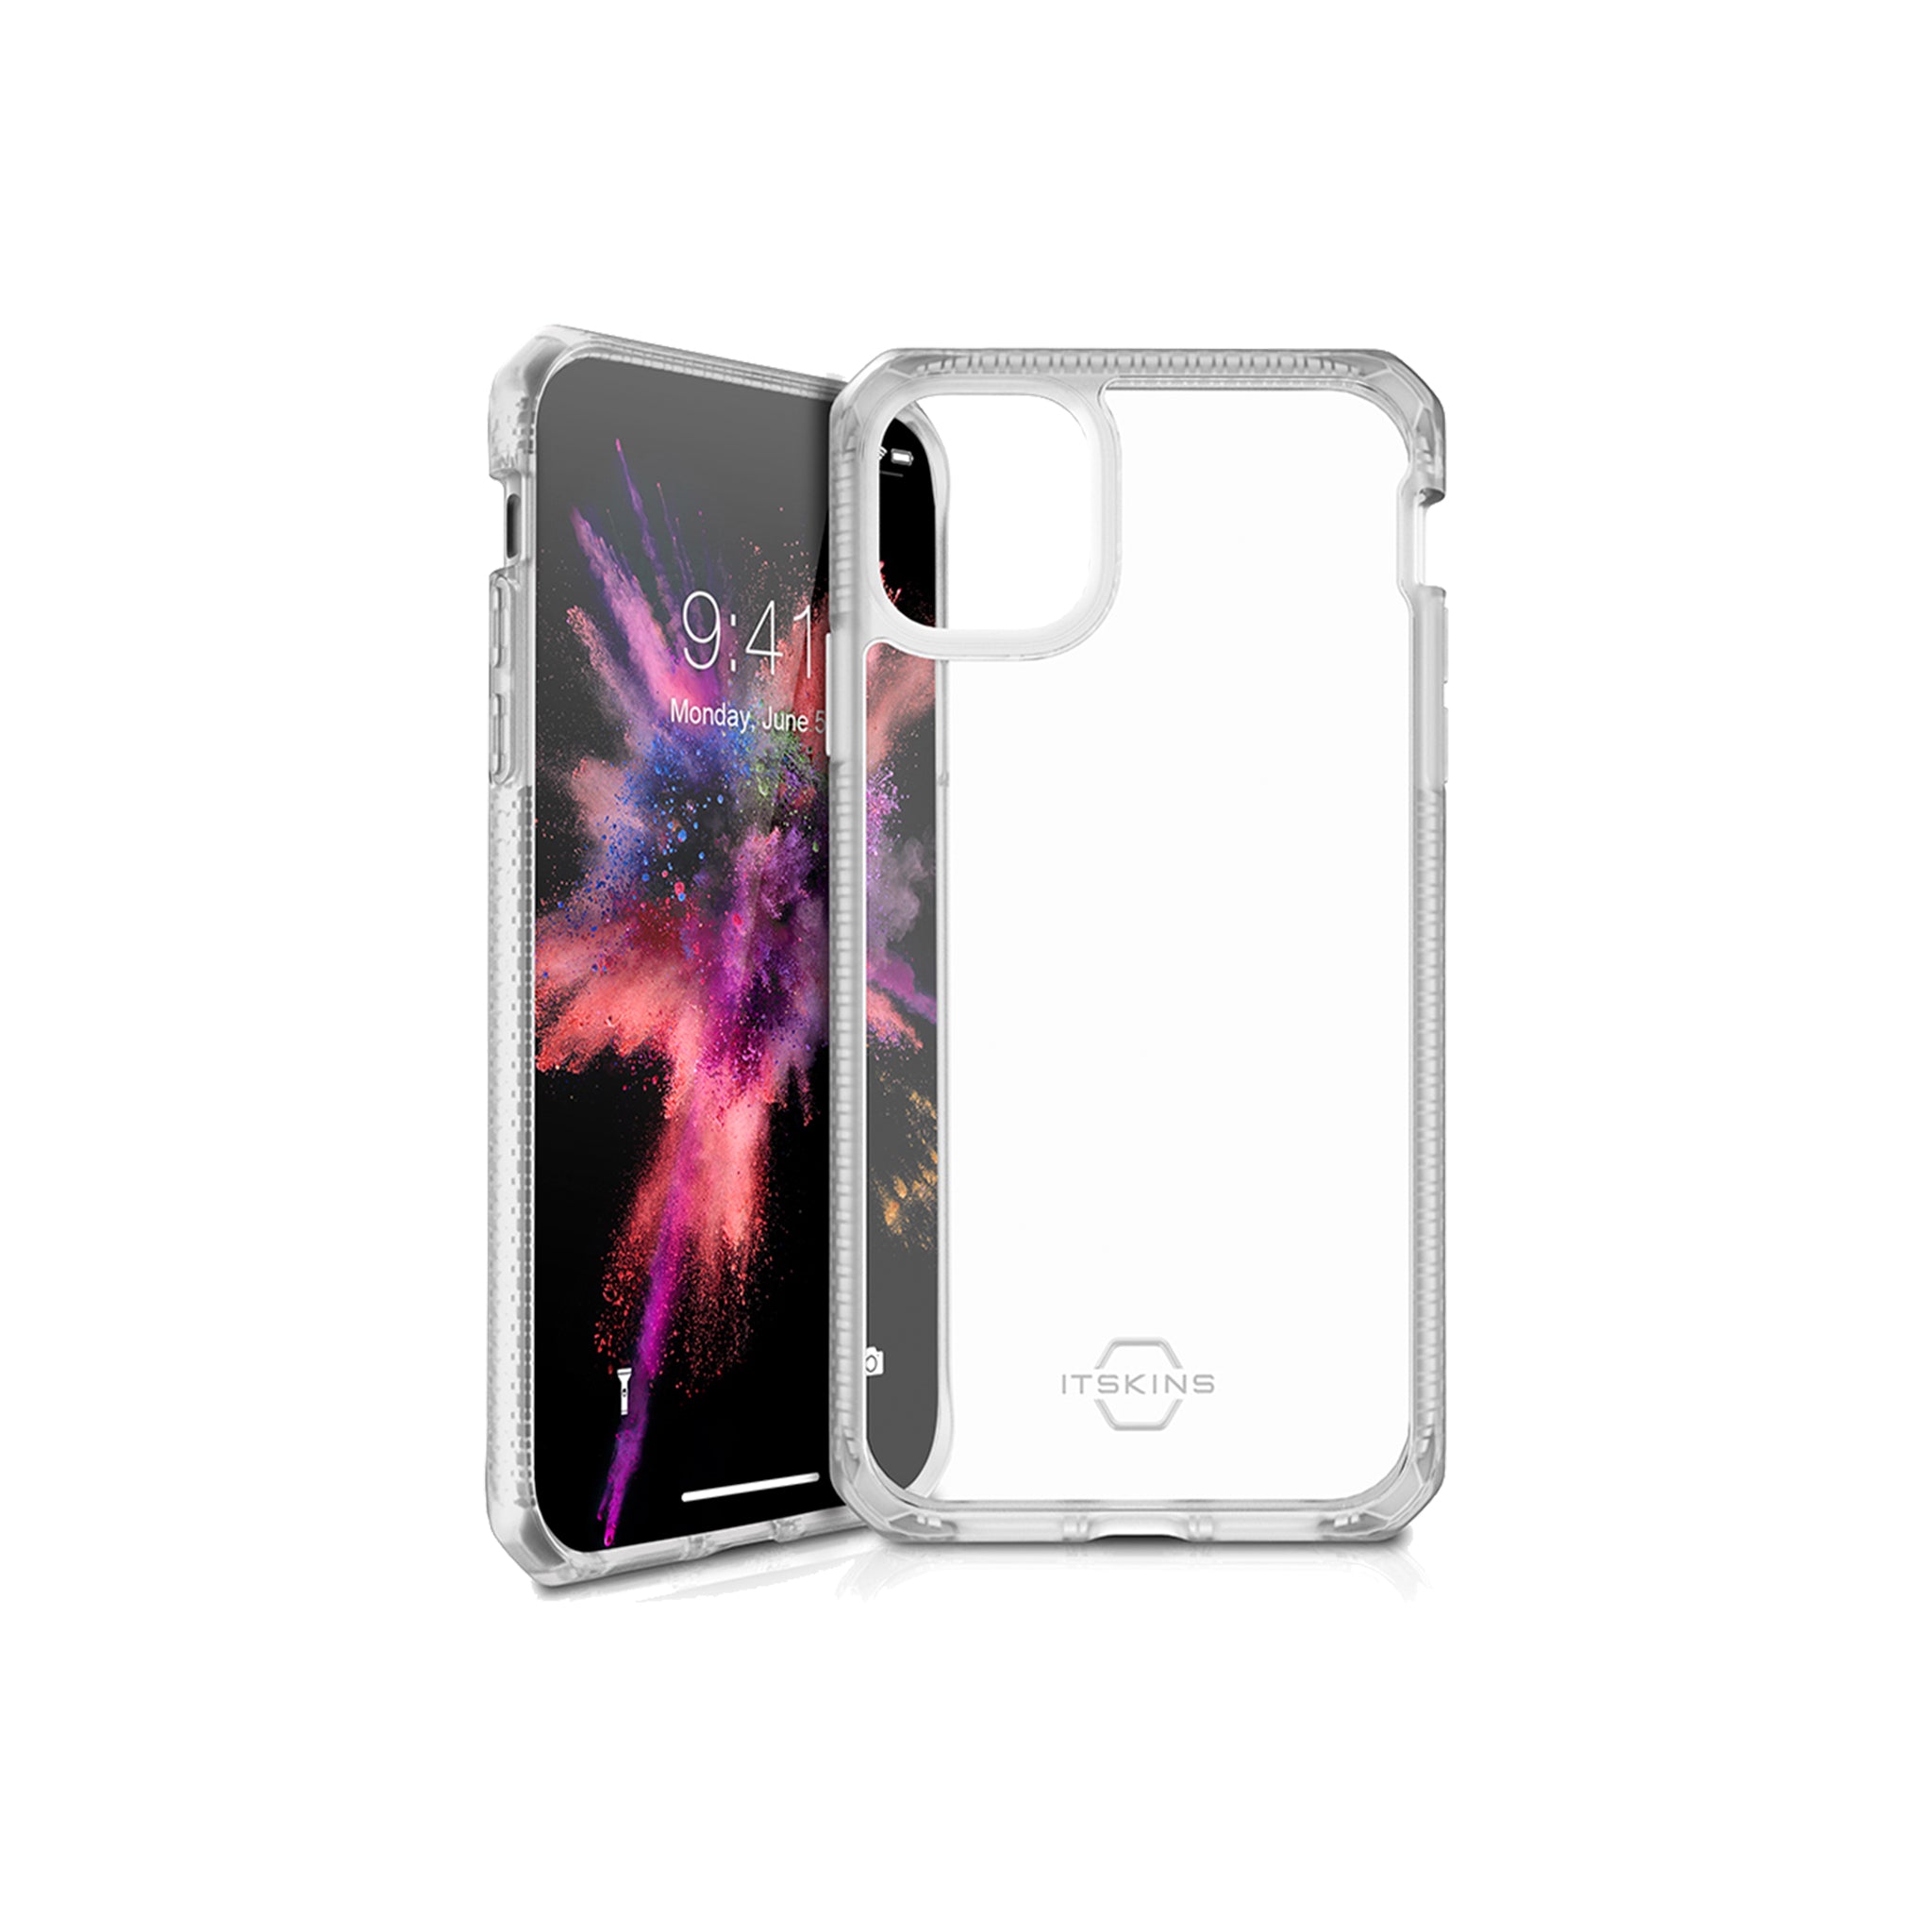 Itskins - Hybrid Frost Mkii Case For Apple Iphone 11 Pro Max - Transparent